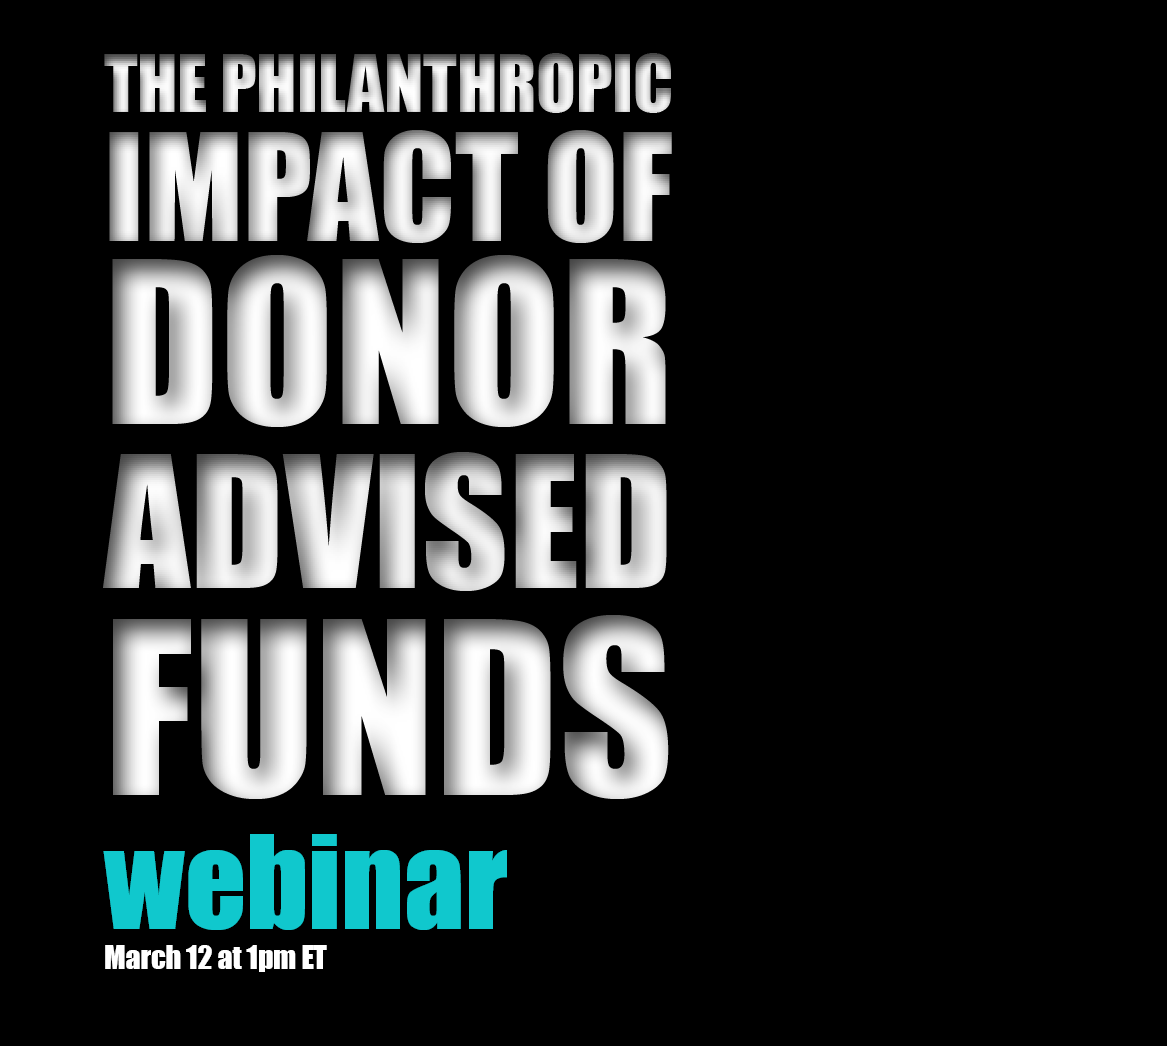 The philanthropic impact of donor-advised funds webinar.